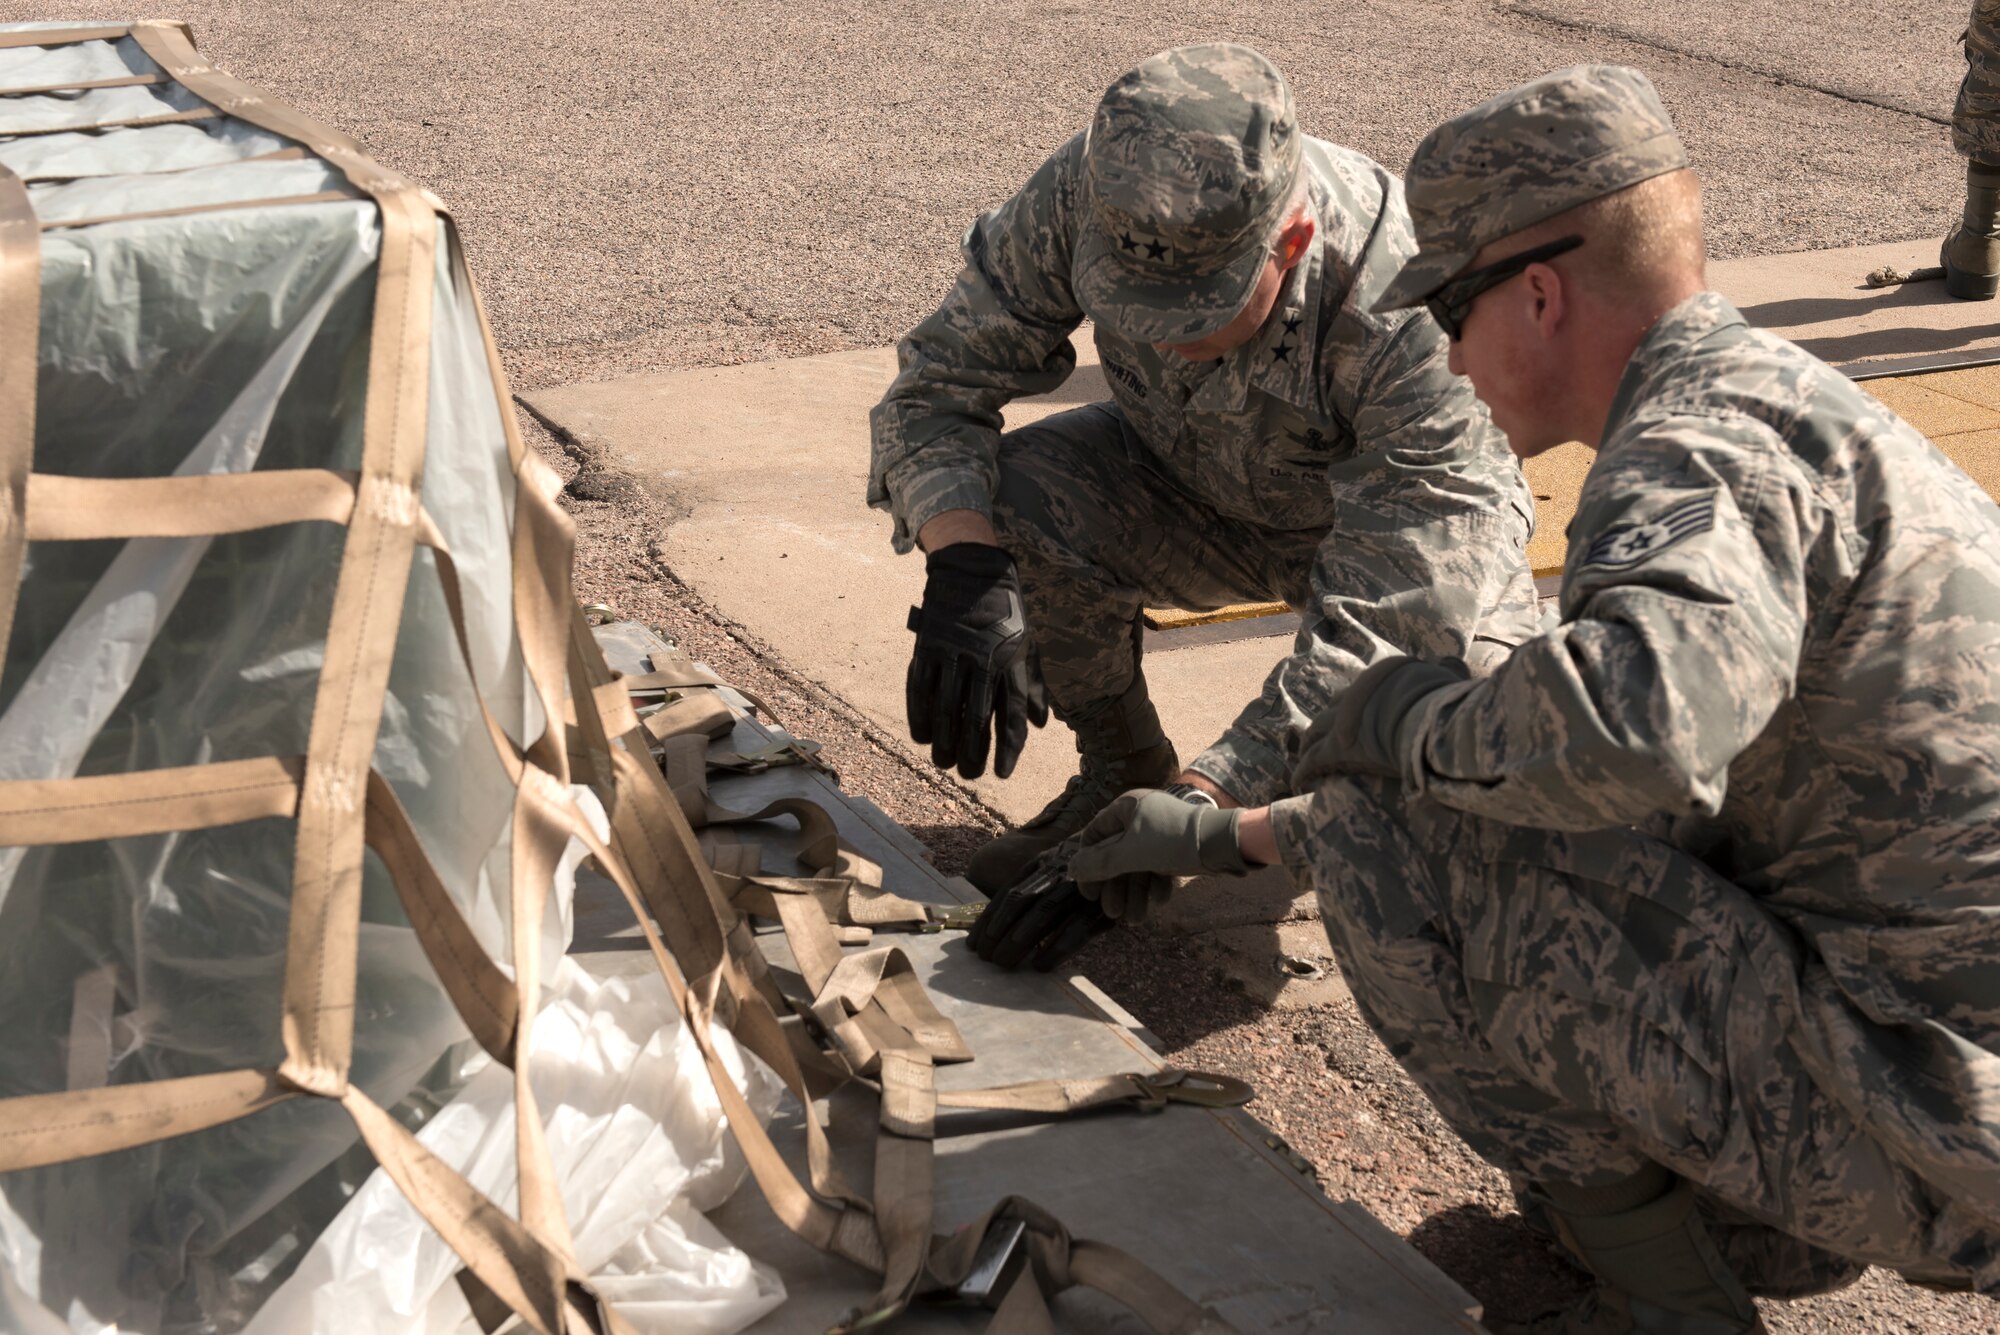 PETERSON AIR FORCE BASE, Colo. – Maj. Gen. Stephen Whiting, 14th Air Force commander, toured the 21st Logistics Readiness Squadron Peterson Air Force Base Colo., March 14, 2018. Whiting participated in the securing and the loading of freight. (U.S. Air Force photo by Cameron Hunt)